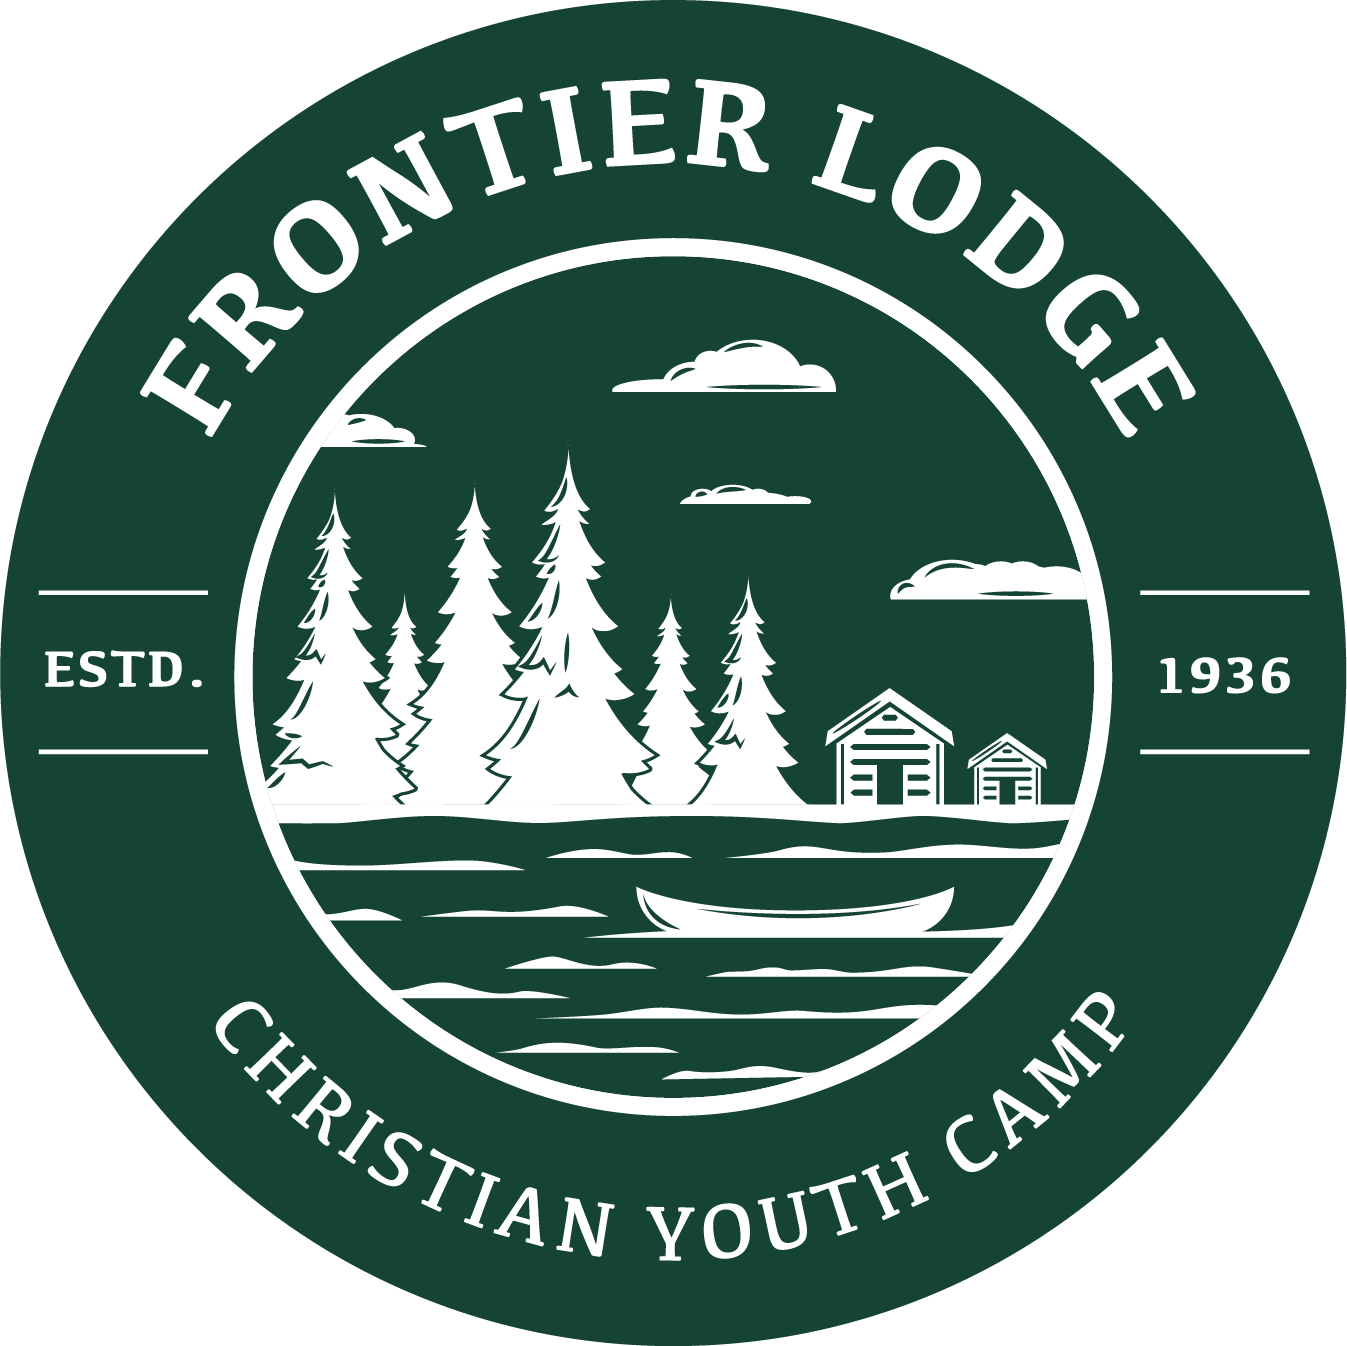 Frontier Lodge Christian Youth Camp